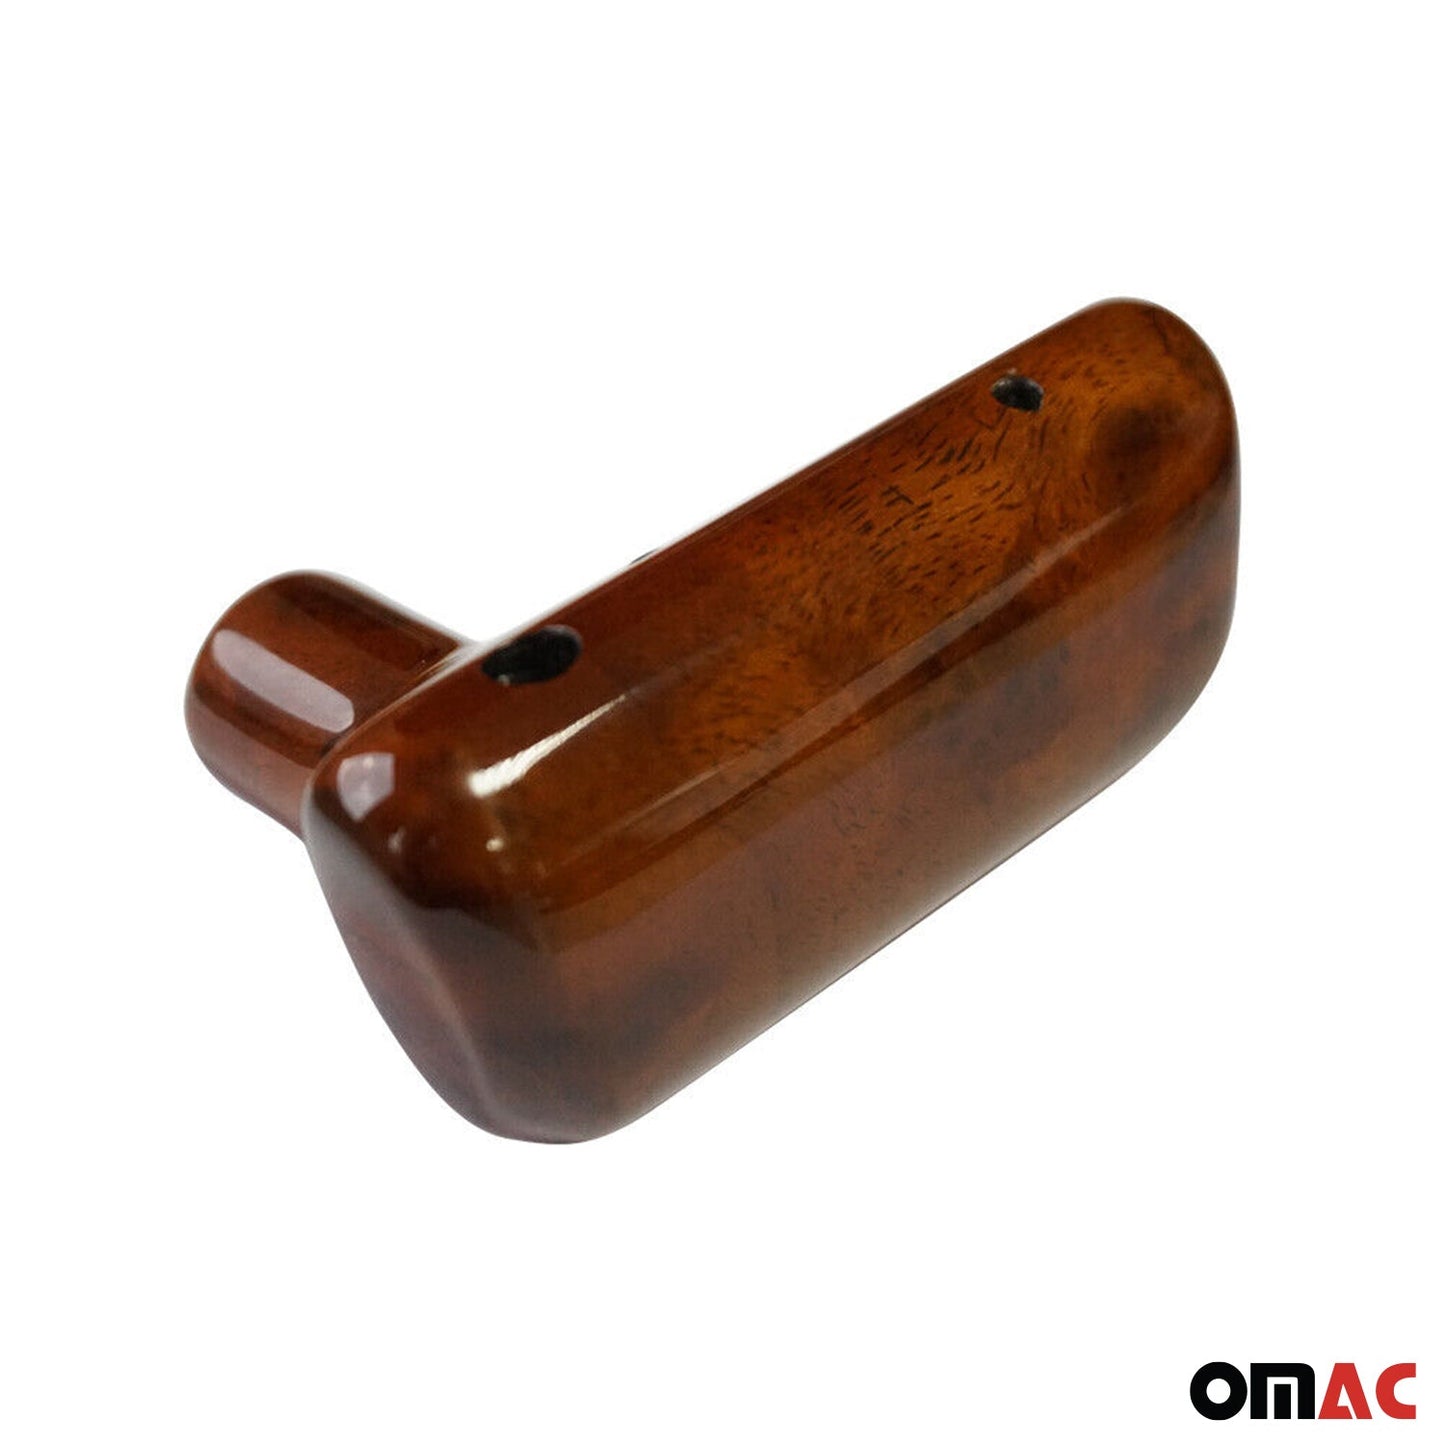 OMAC Gear Shift Knob for BMW E38 E39 E46 E60 E61 E63 E64 E81 E83 Automatic T-Handle A001829